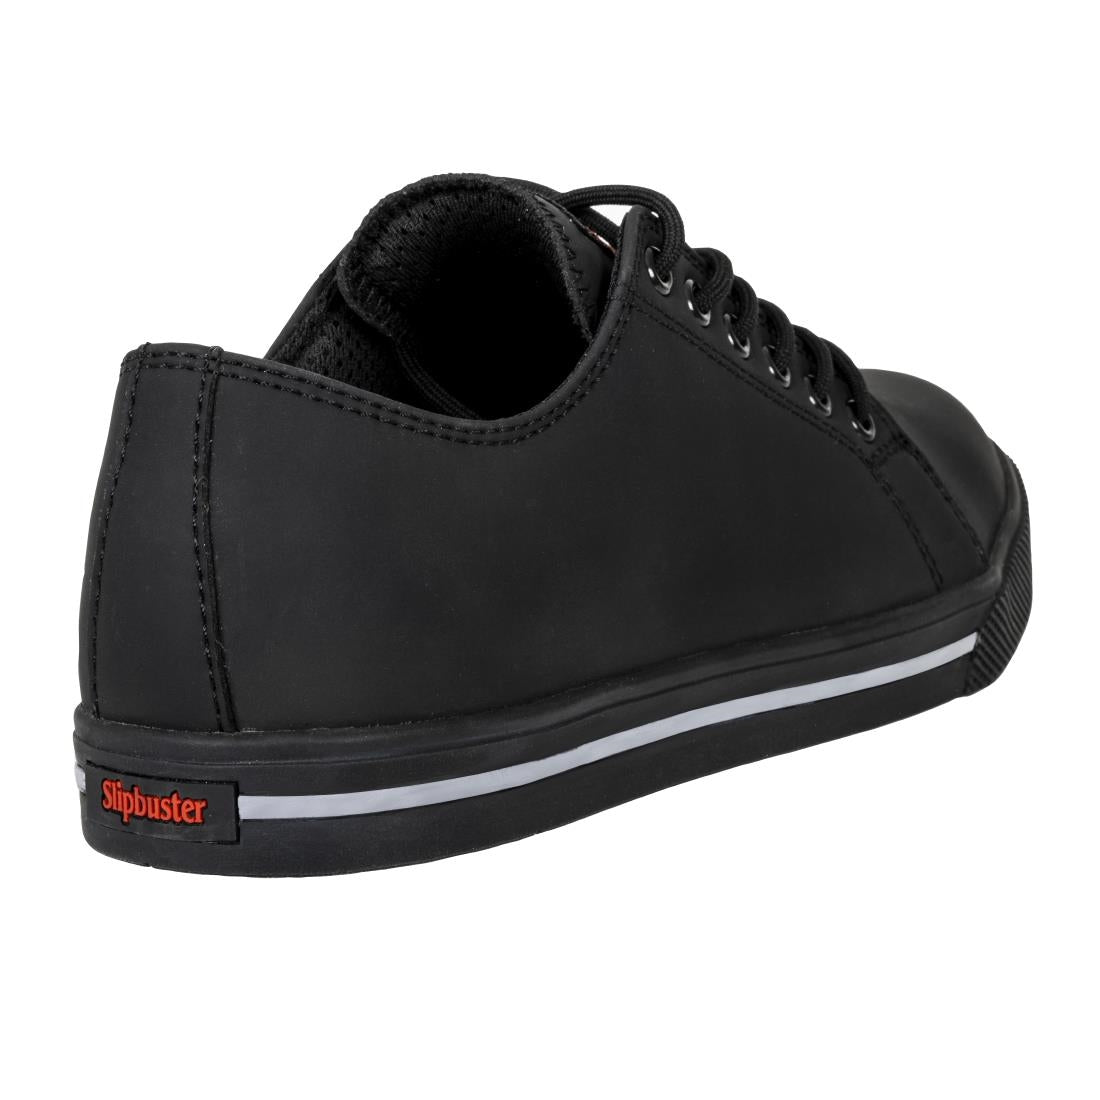 BA060-43 Slipbuster Recycled Microfibre Safety Trainers Matte Black 43 JD Catering Equipment Solutions Ltd